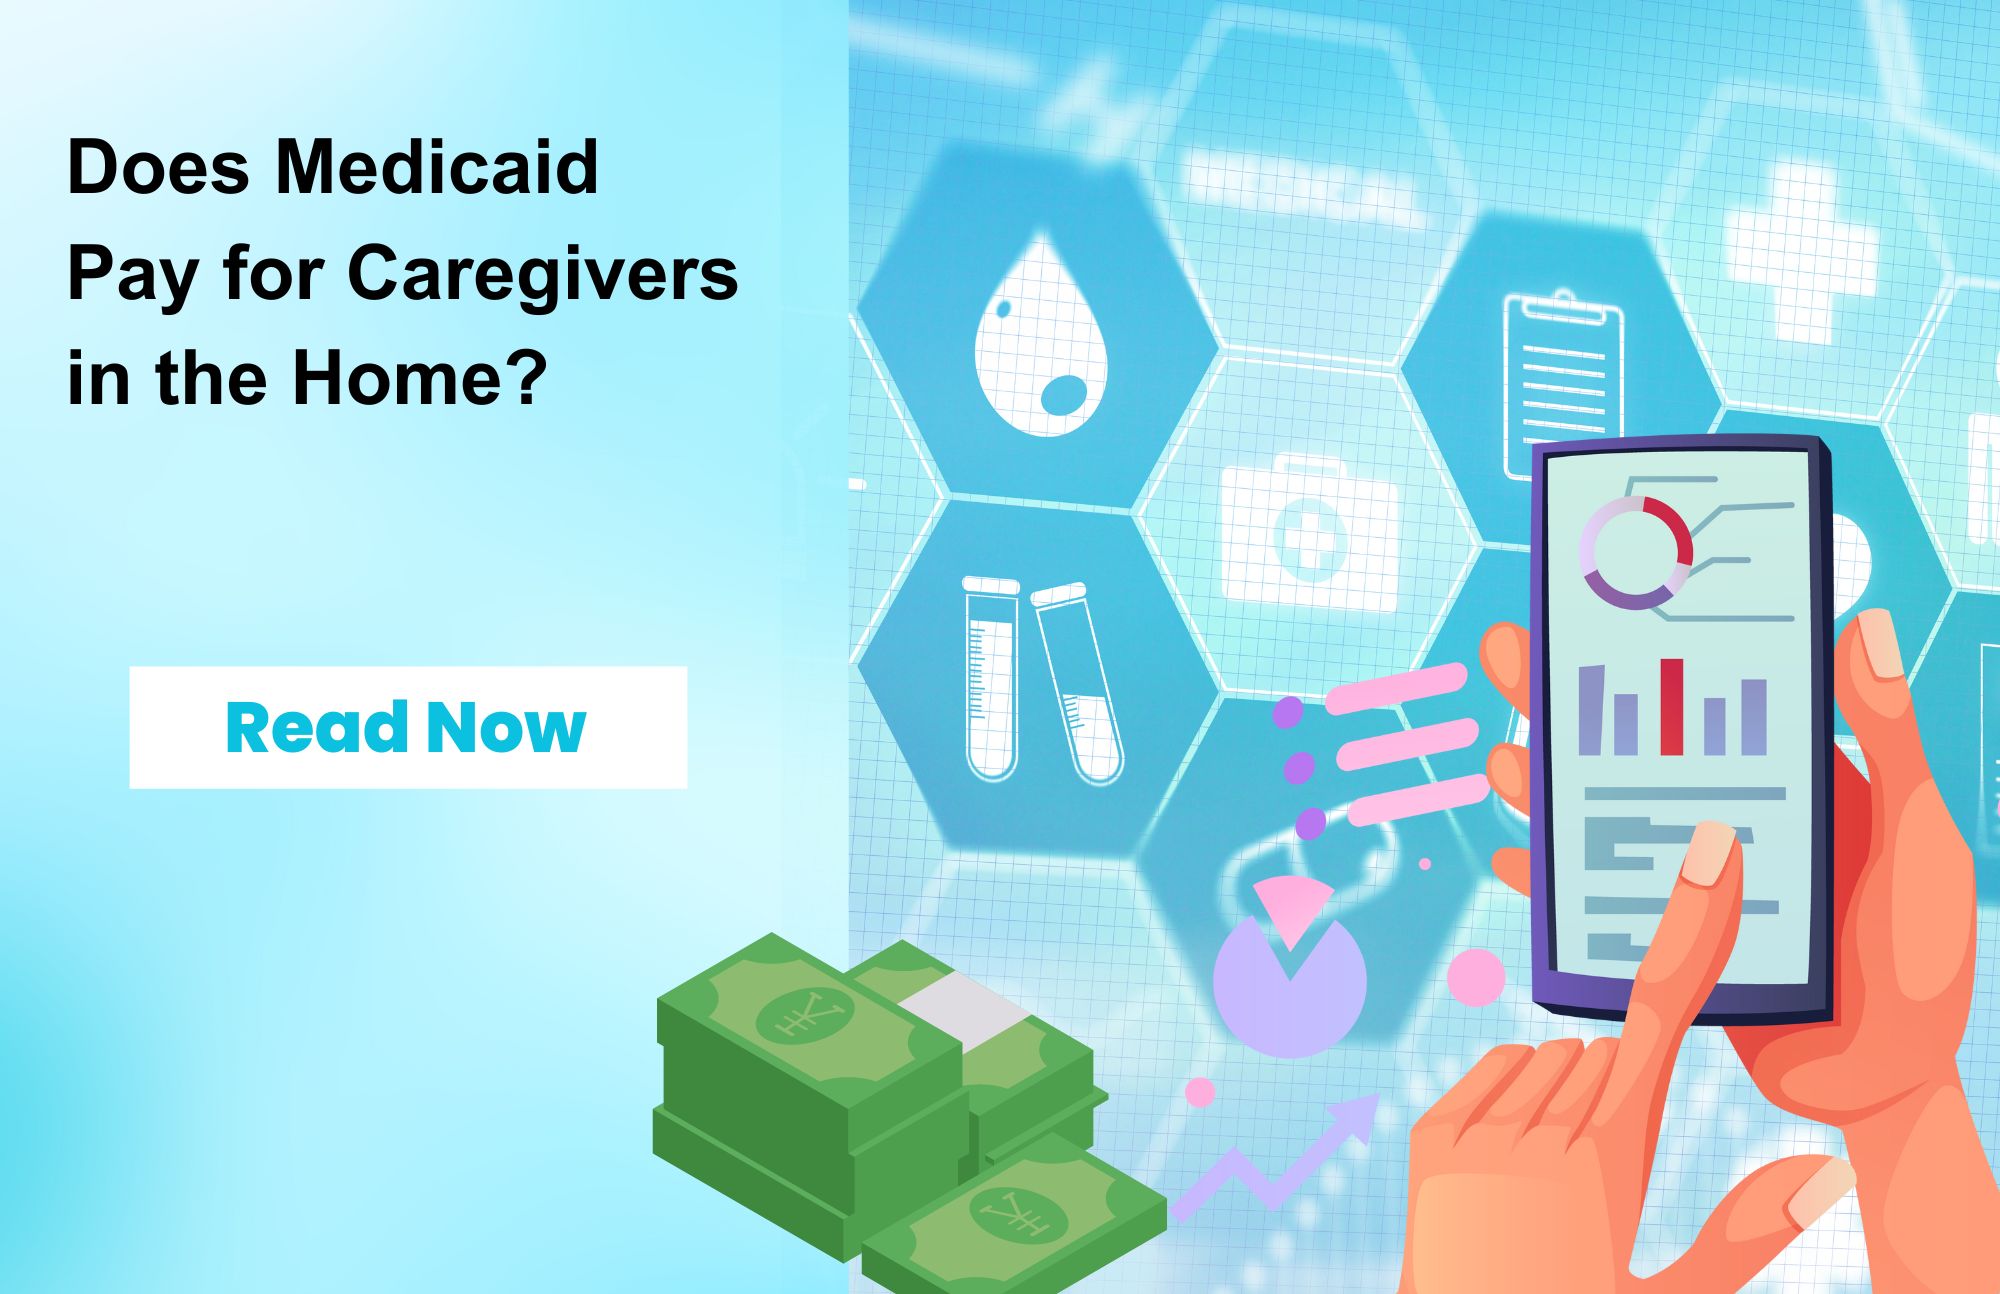 Does Medicaid Pay for Caregivers in the Home?